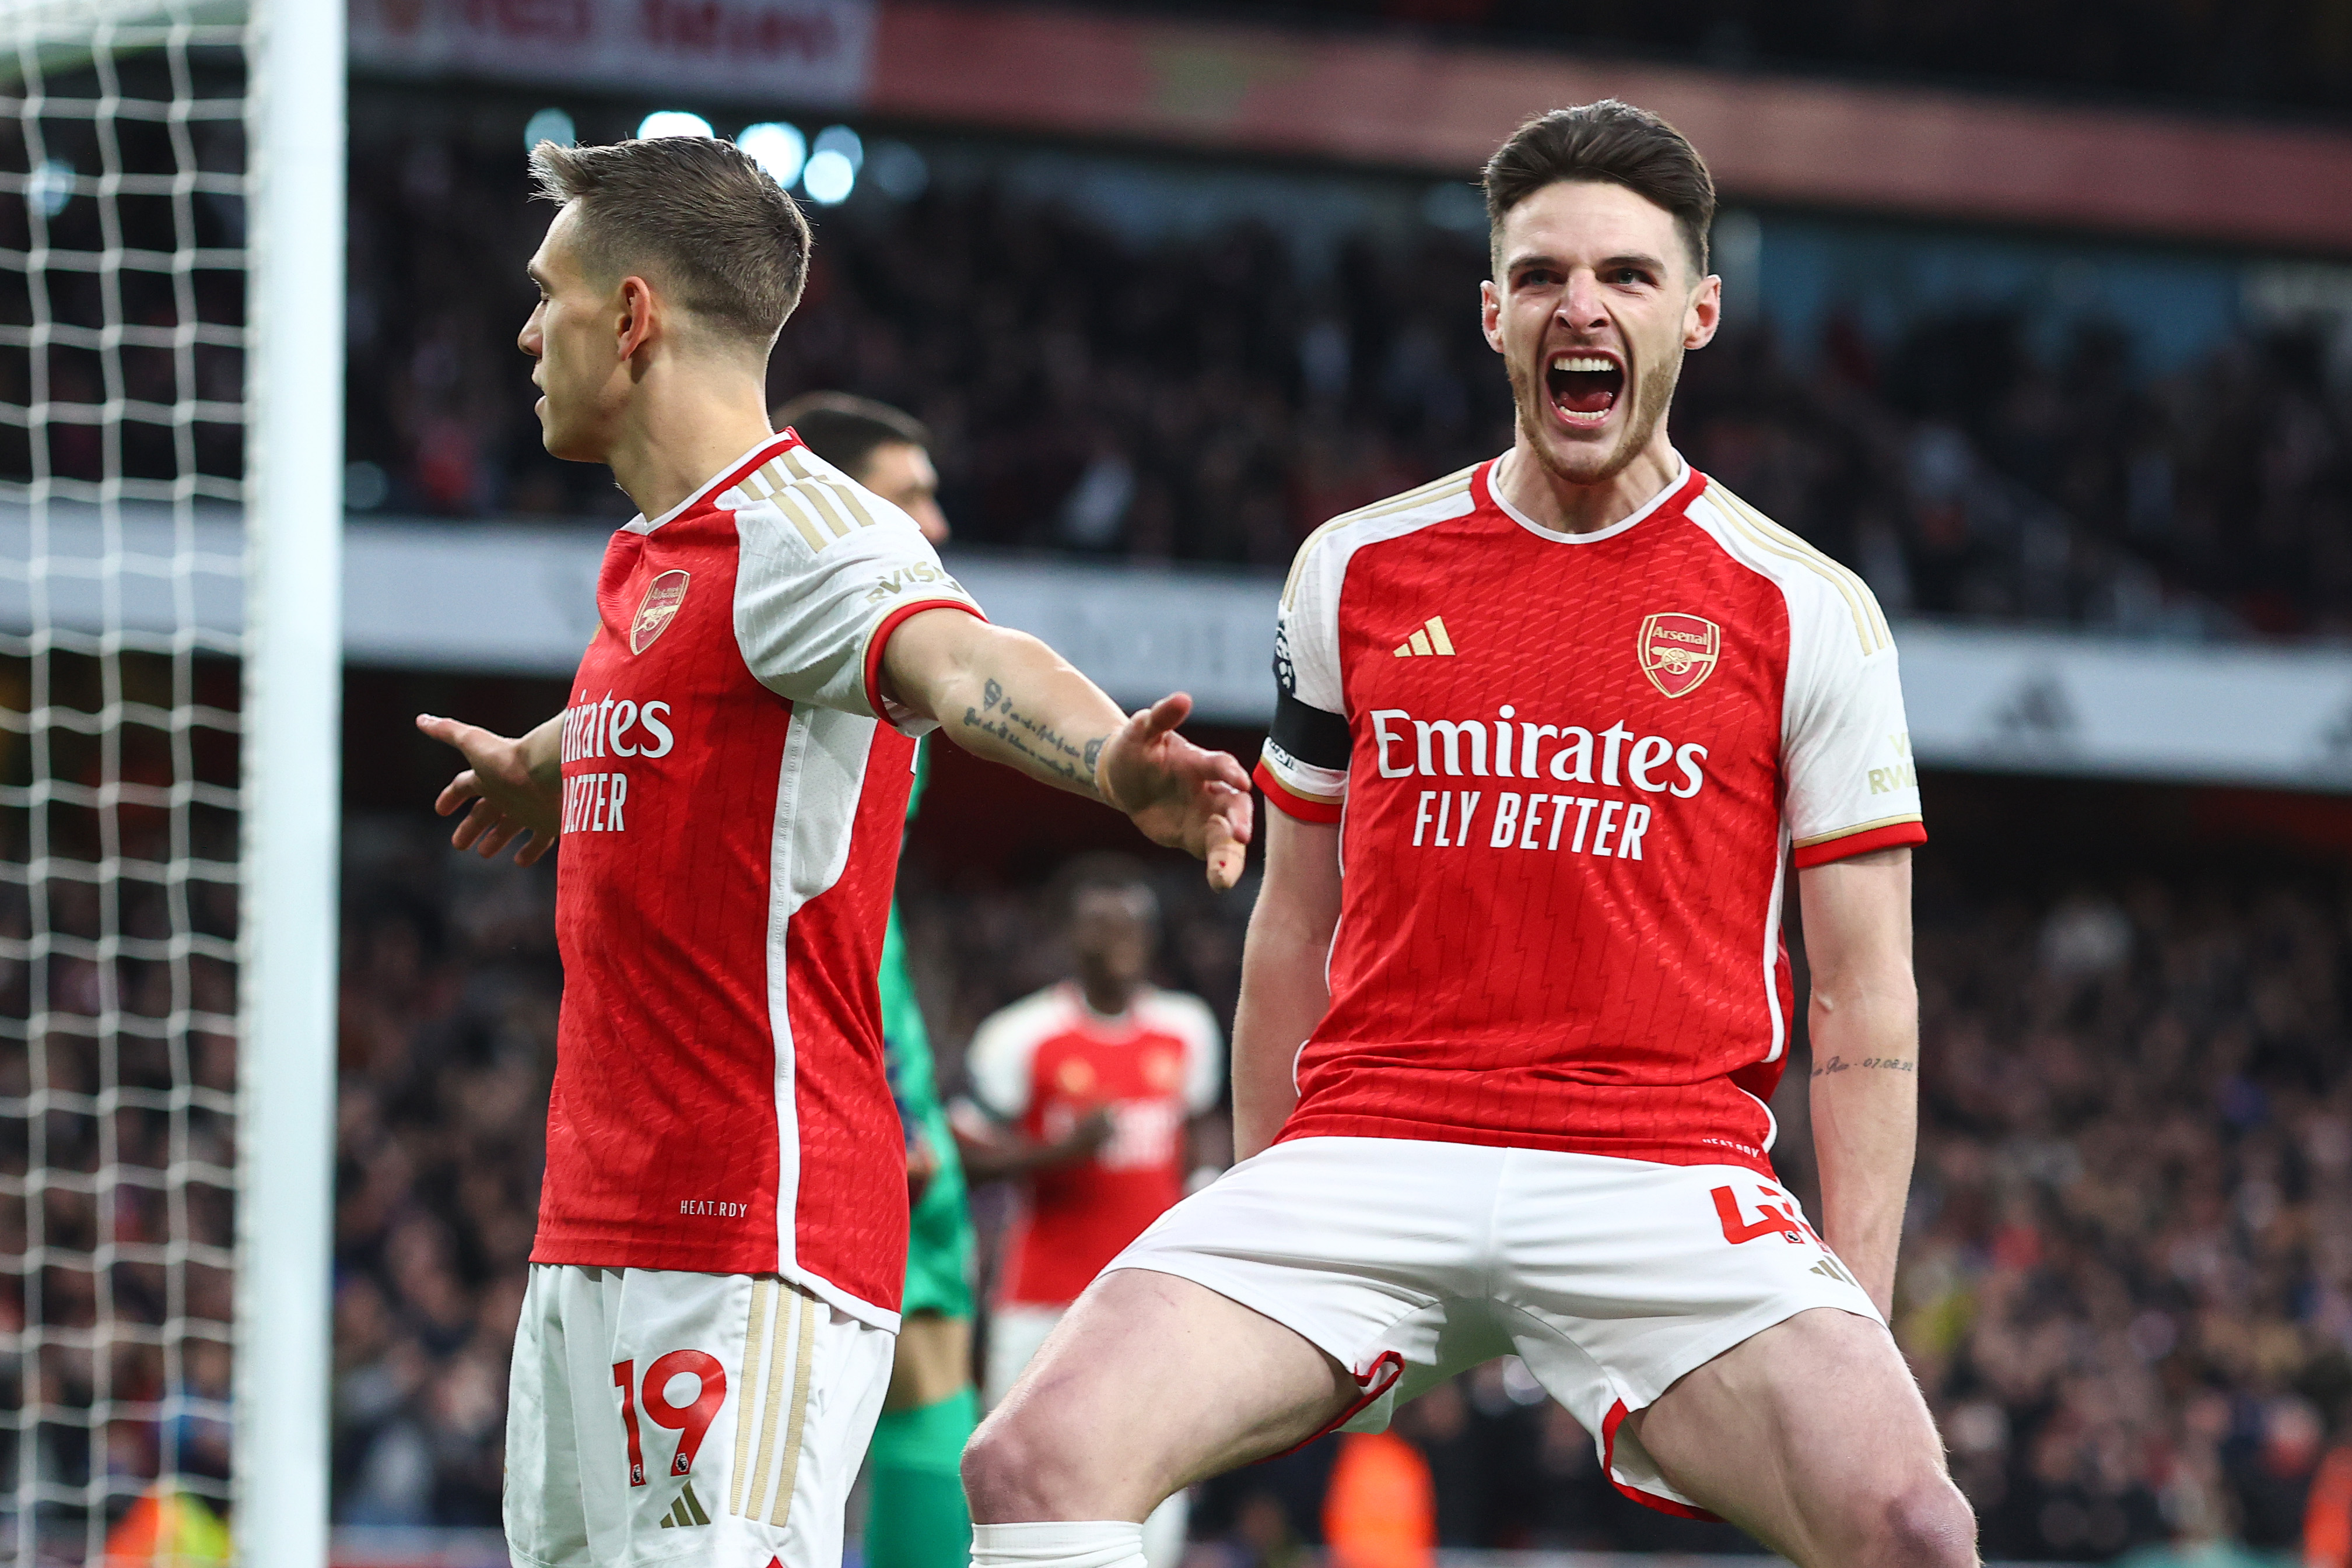 Arsenal 5-0 Chelsea: Gunners thrash sorry Blues to extend lead at top of Premier League 